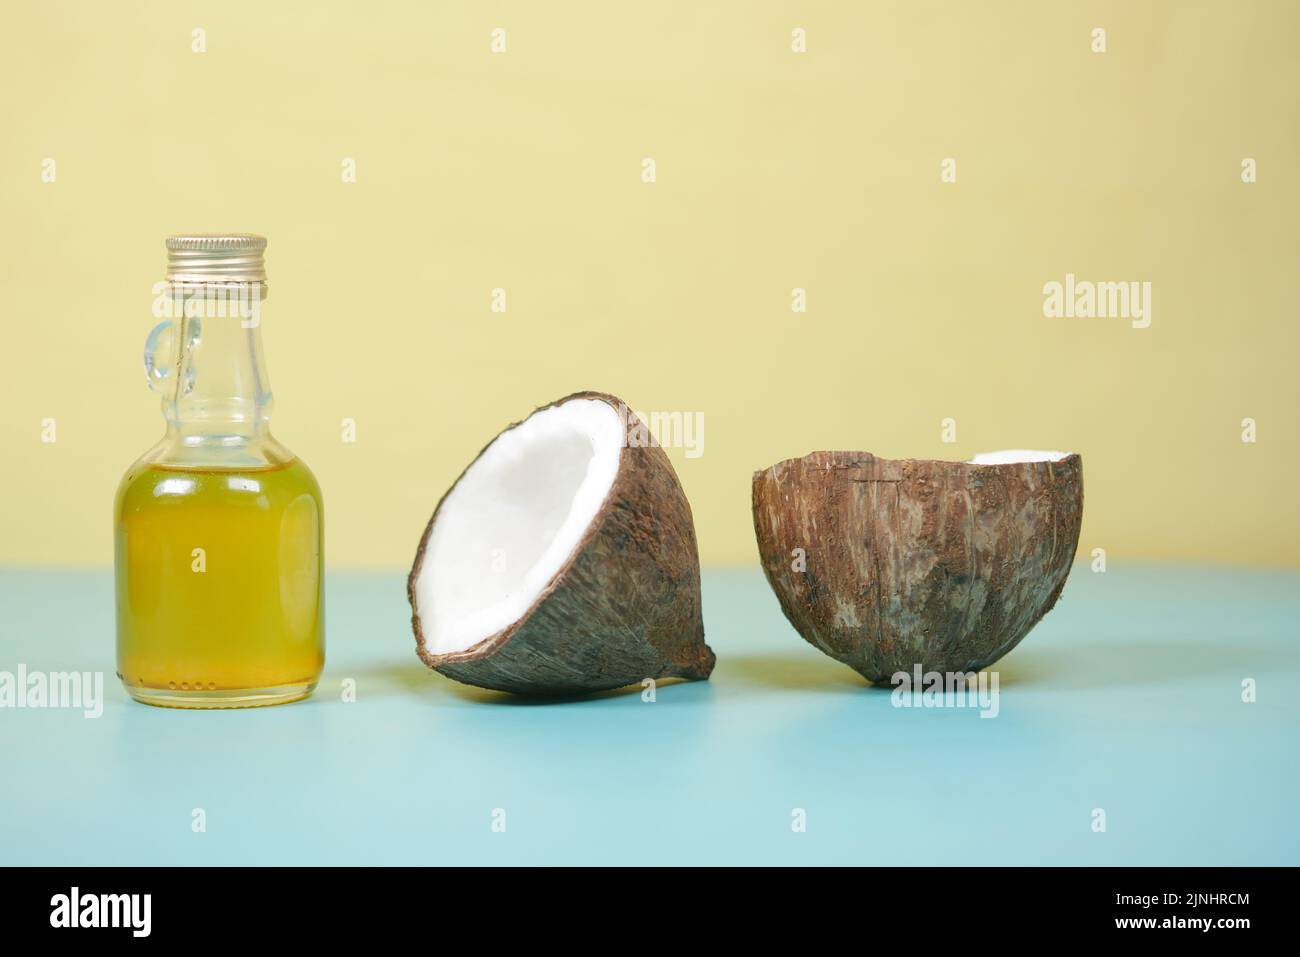 slice of fresh coconut and bottle of oil on a table  Stock Photo